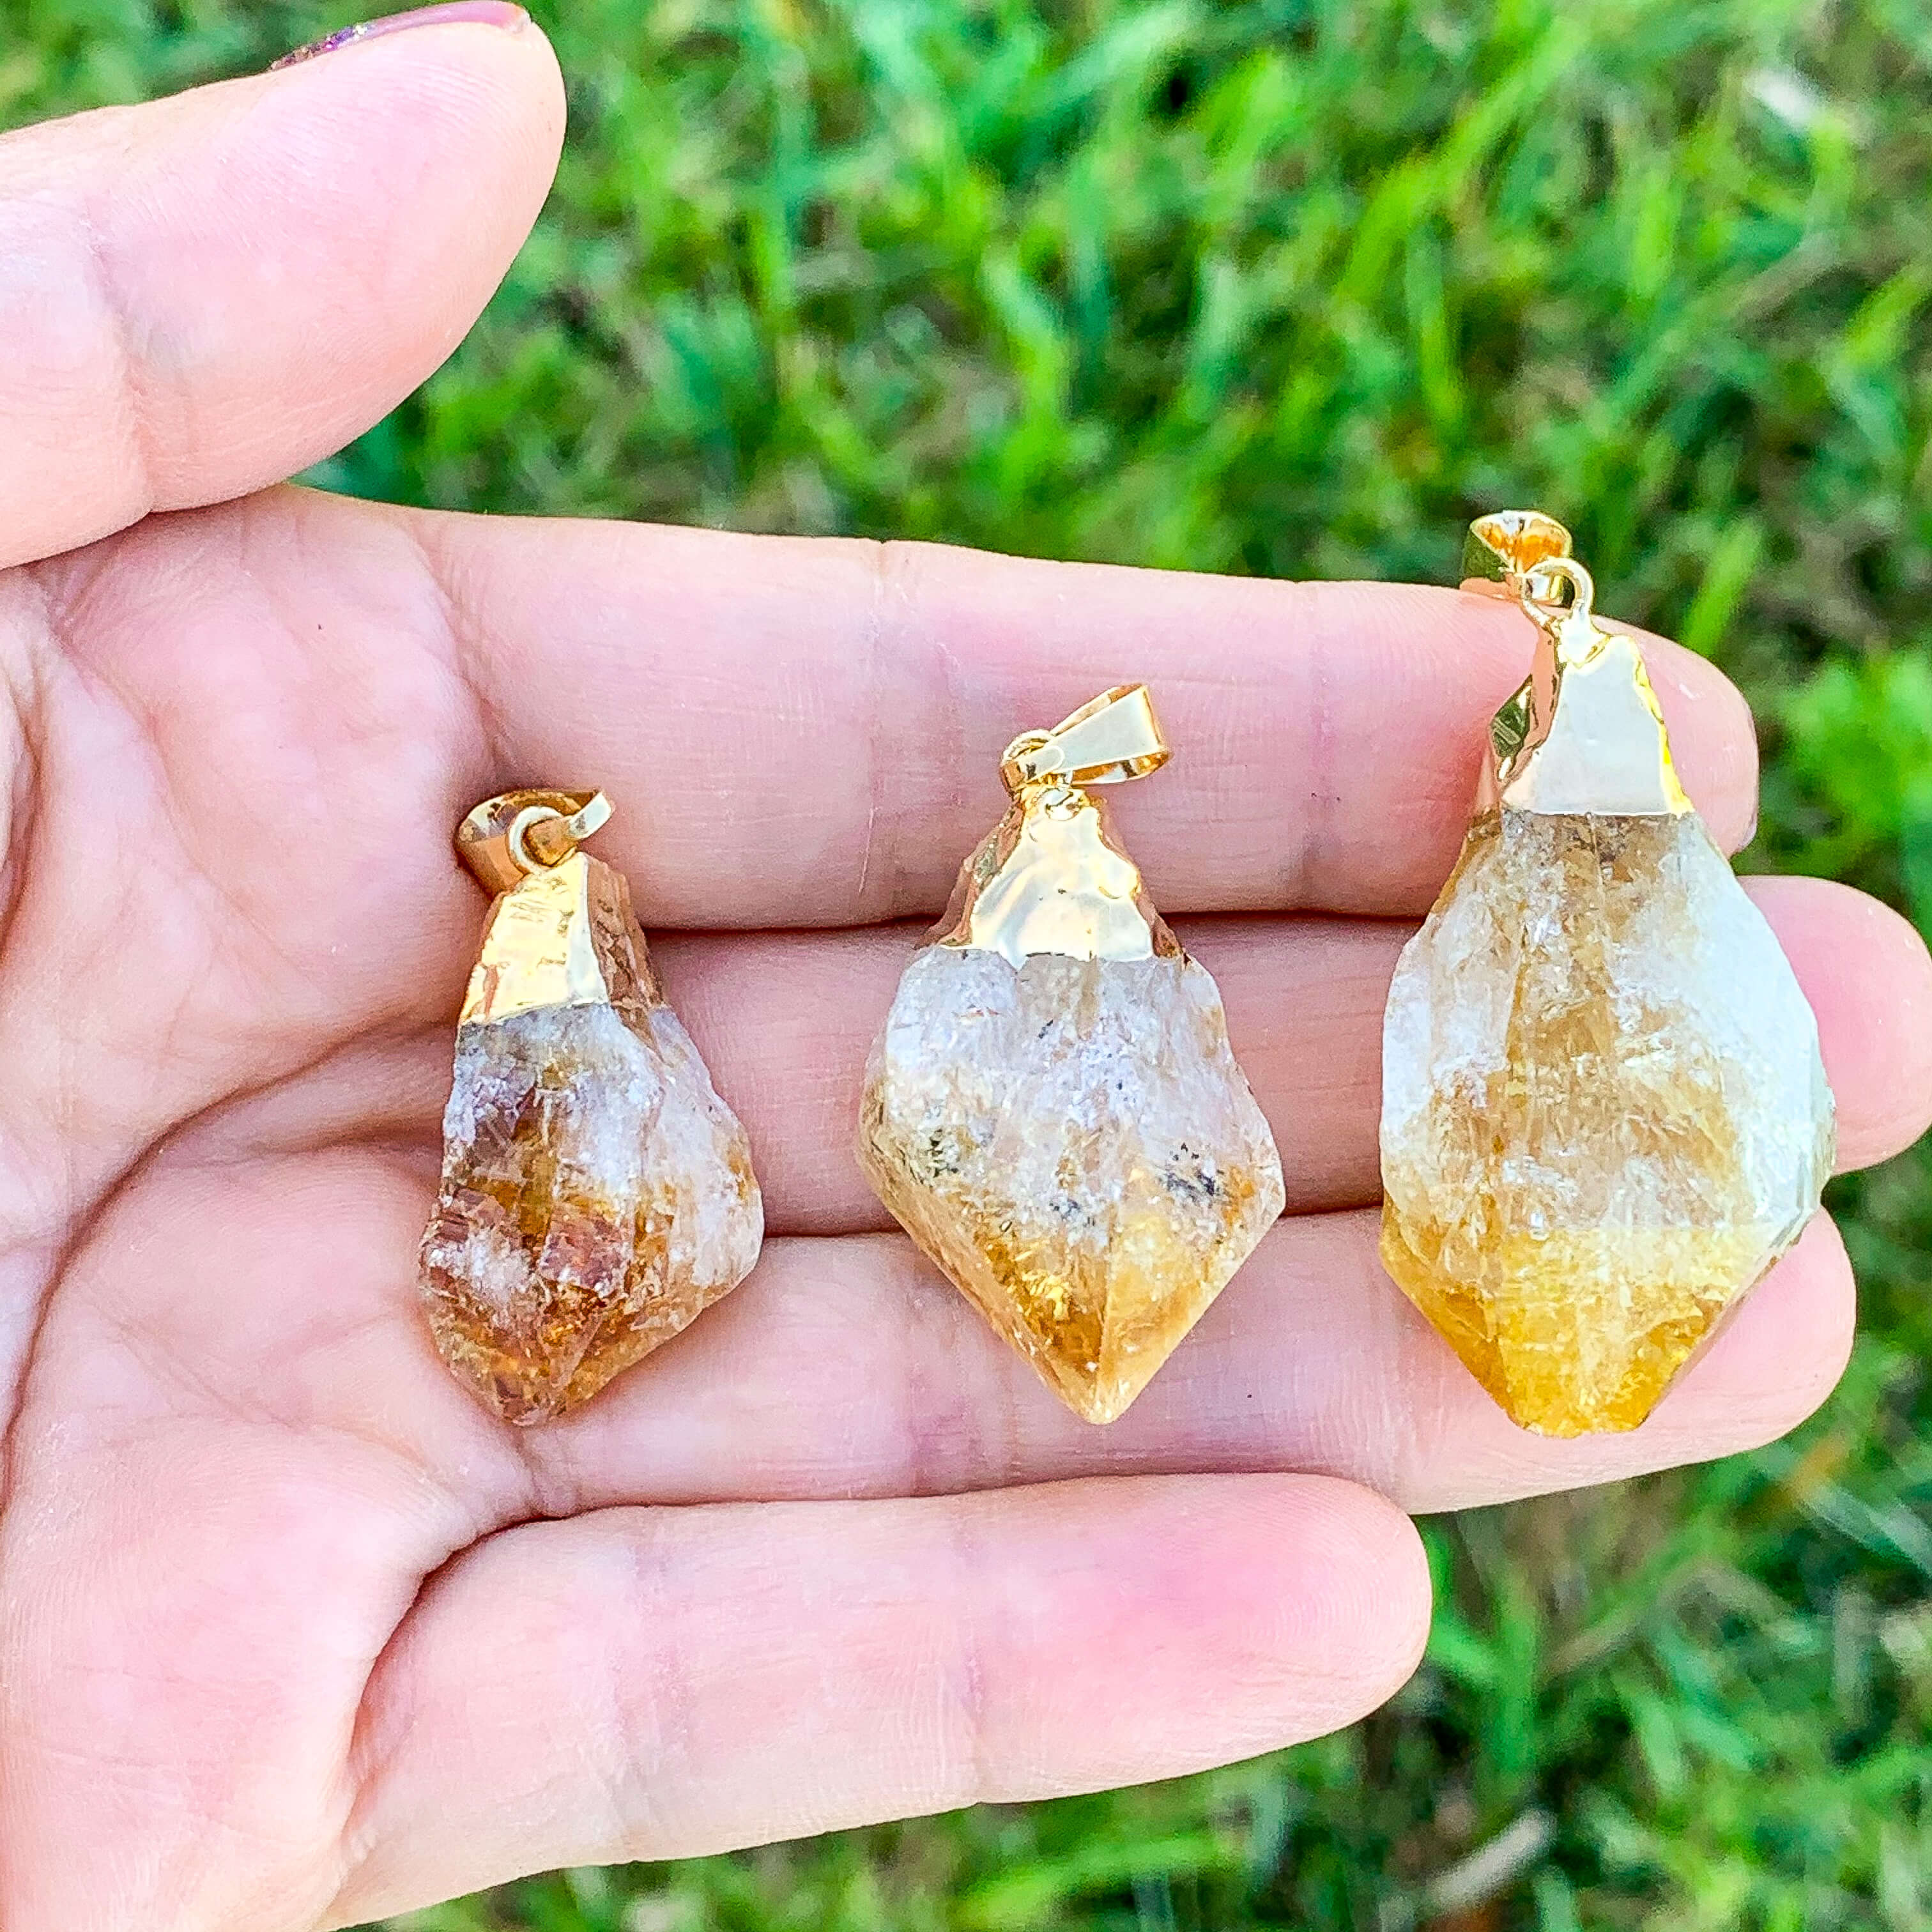 Petite Citrine Point Pendant For Men and Women Jewelry | Shubhanjali | Care  for Your Mind, Body & Soul!